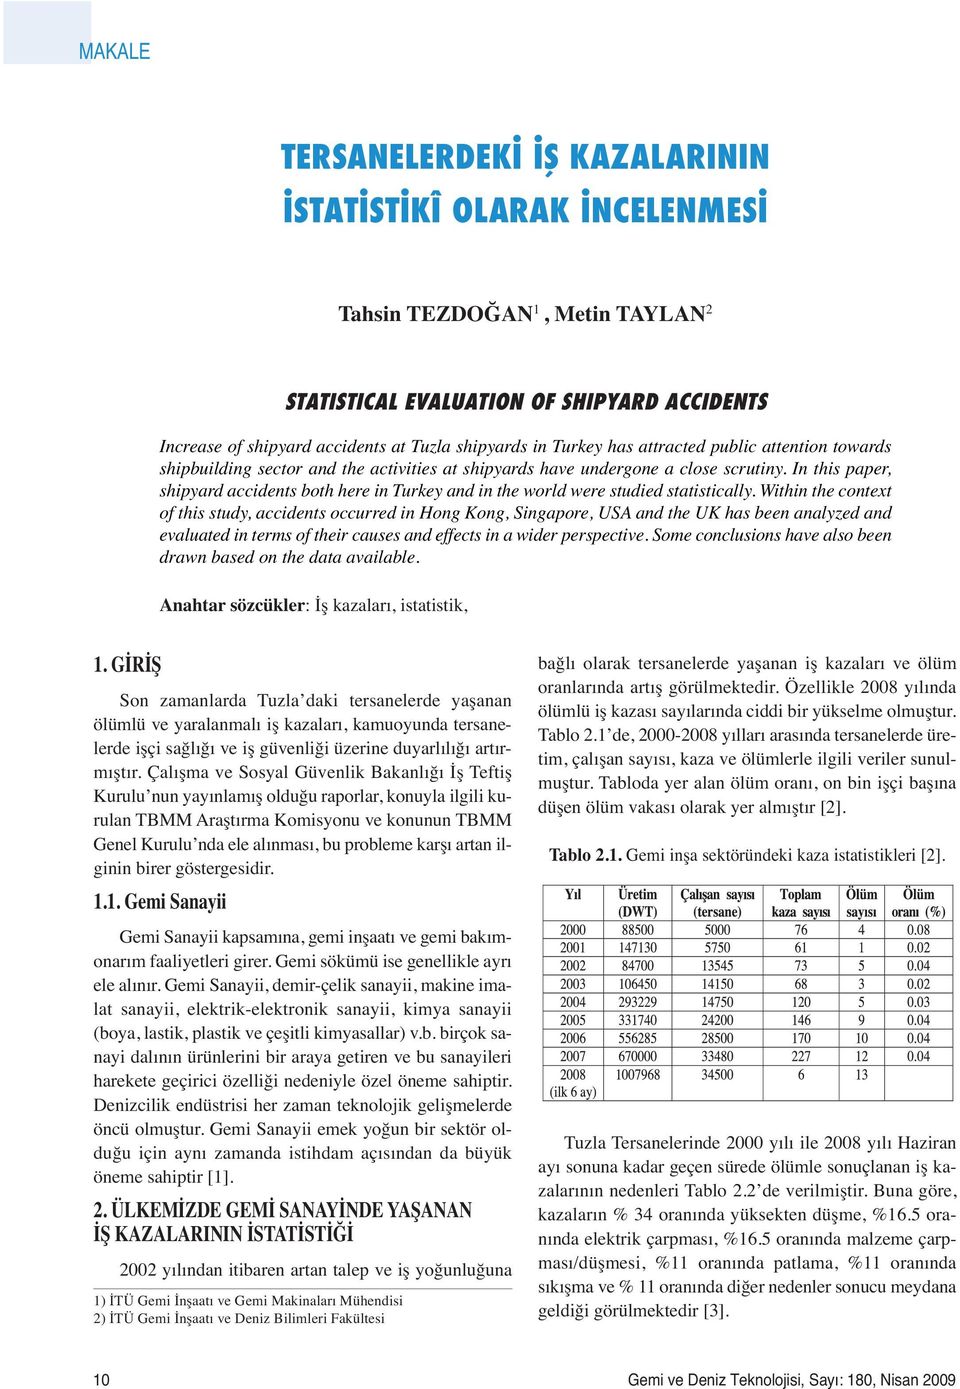 In this paper, shipyard accidents both here in Turkey and in the world were studied statistically.